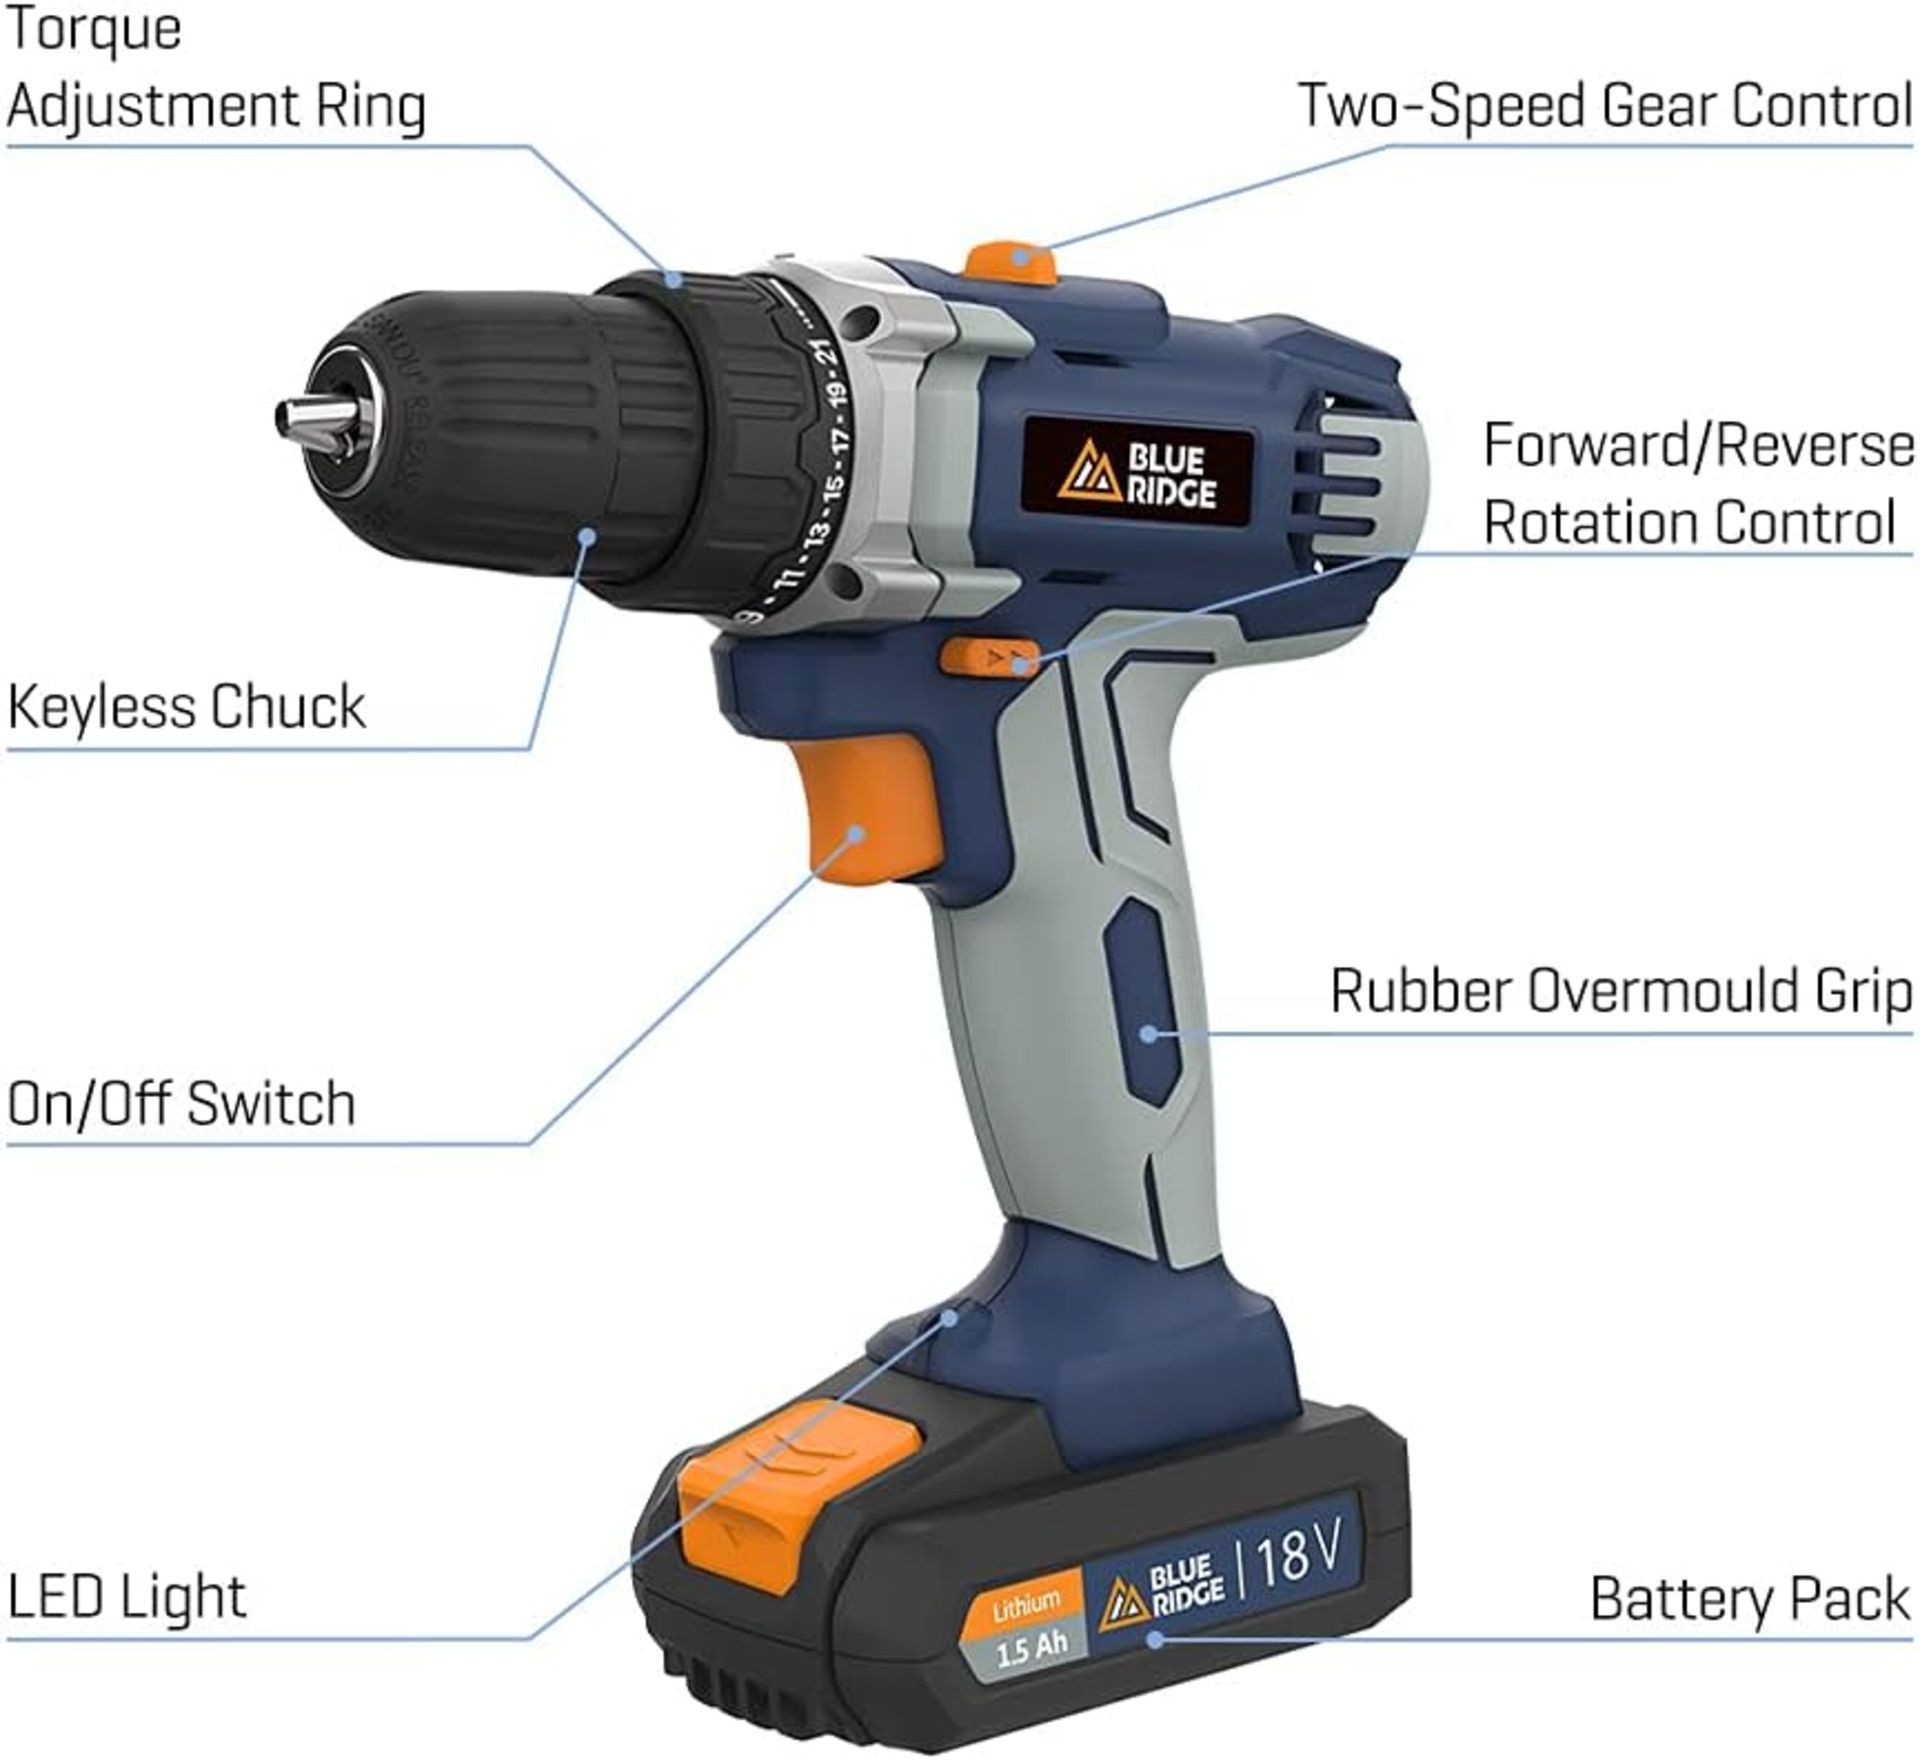 TRADE OT TO CONTAIN 20x NEW & BOXED BLUE RIDGE 18V Cordless Drill Driver. RRP £89 EACH. The - Image 5 of 9